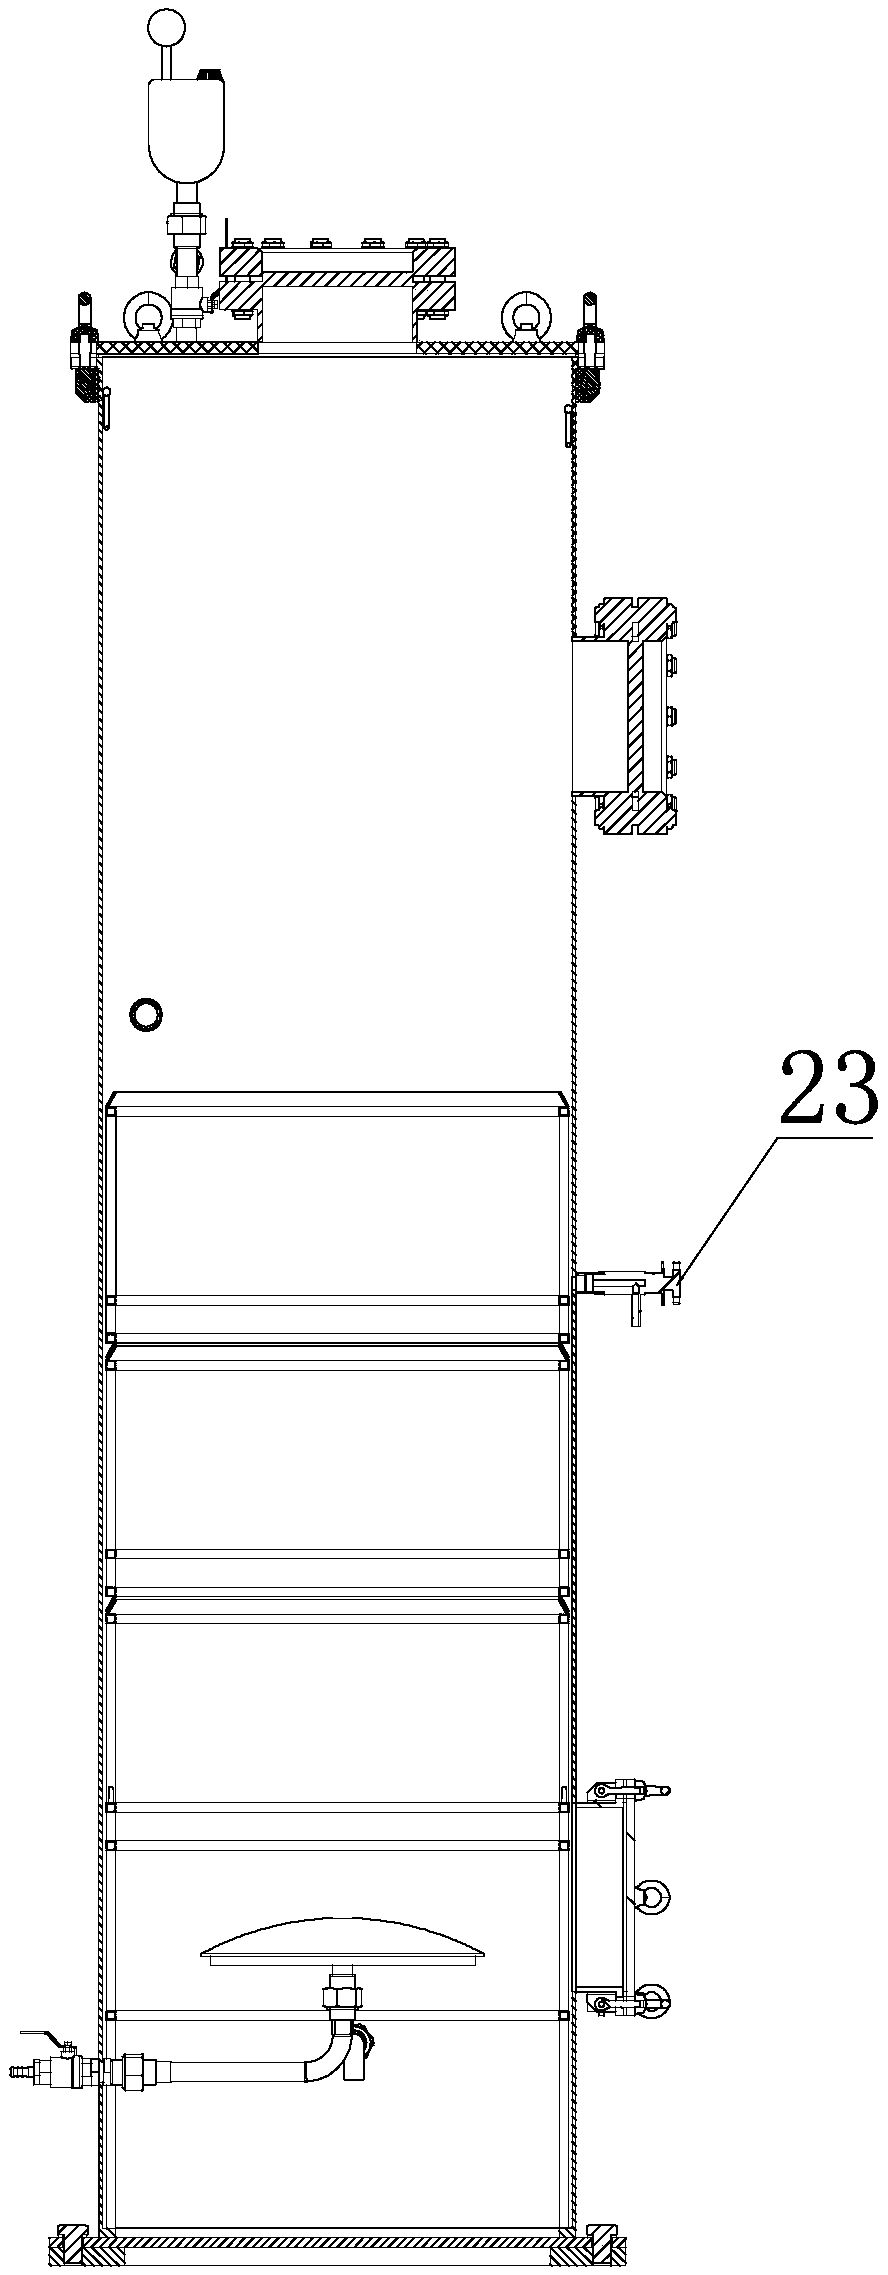 Ozone microbubble catalytic oxidation device and application thereof